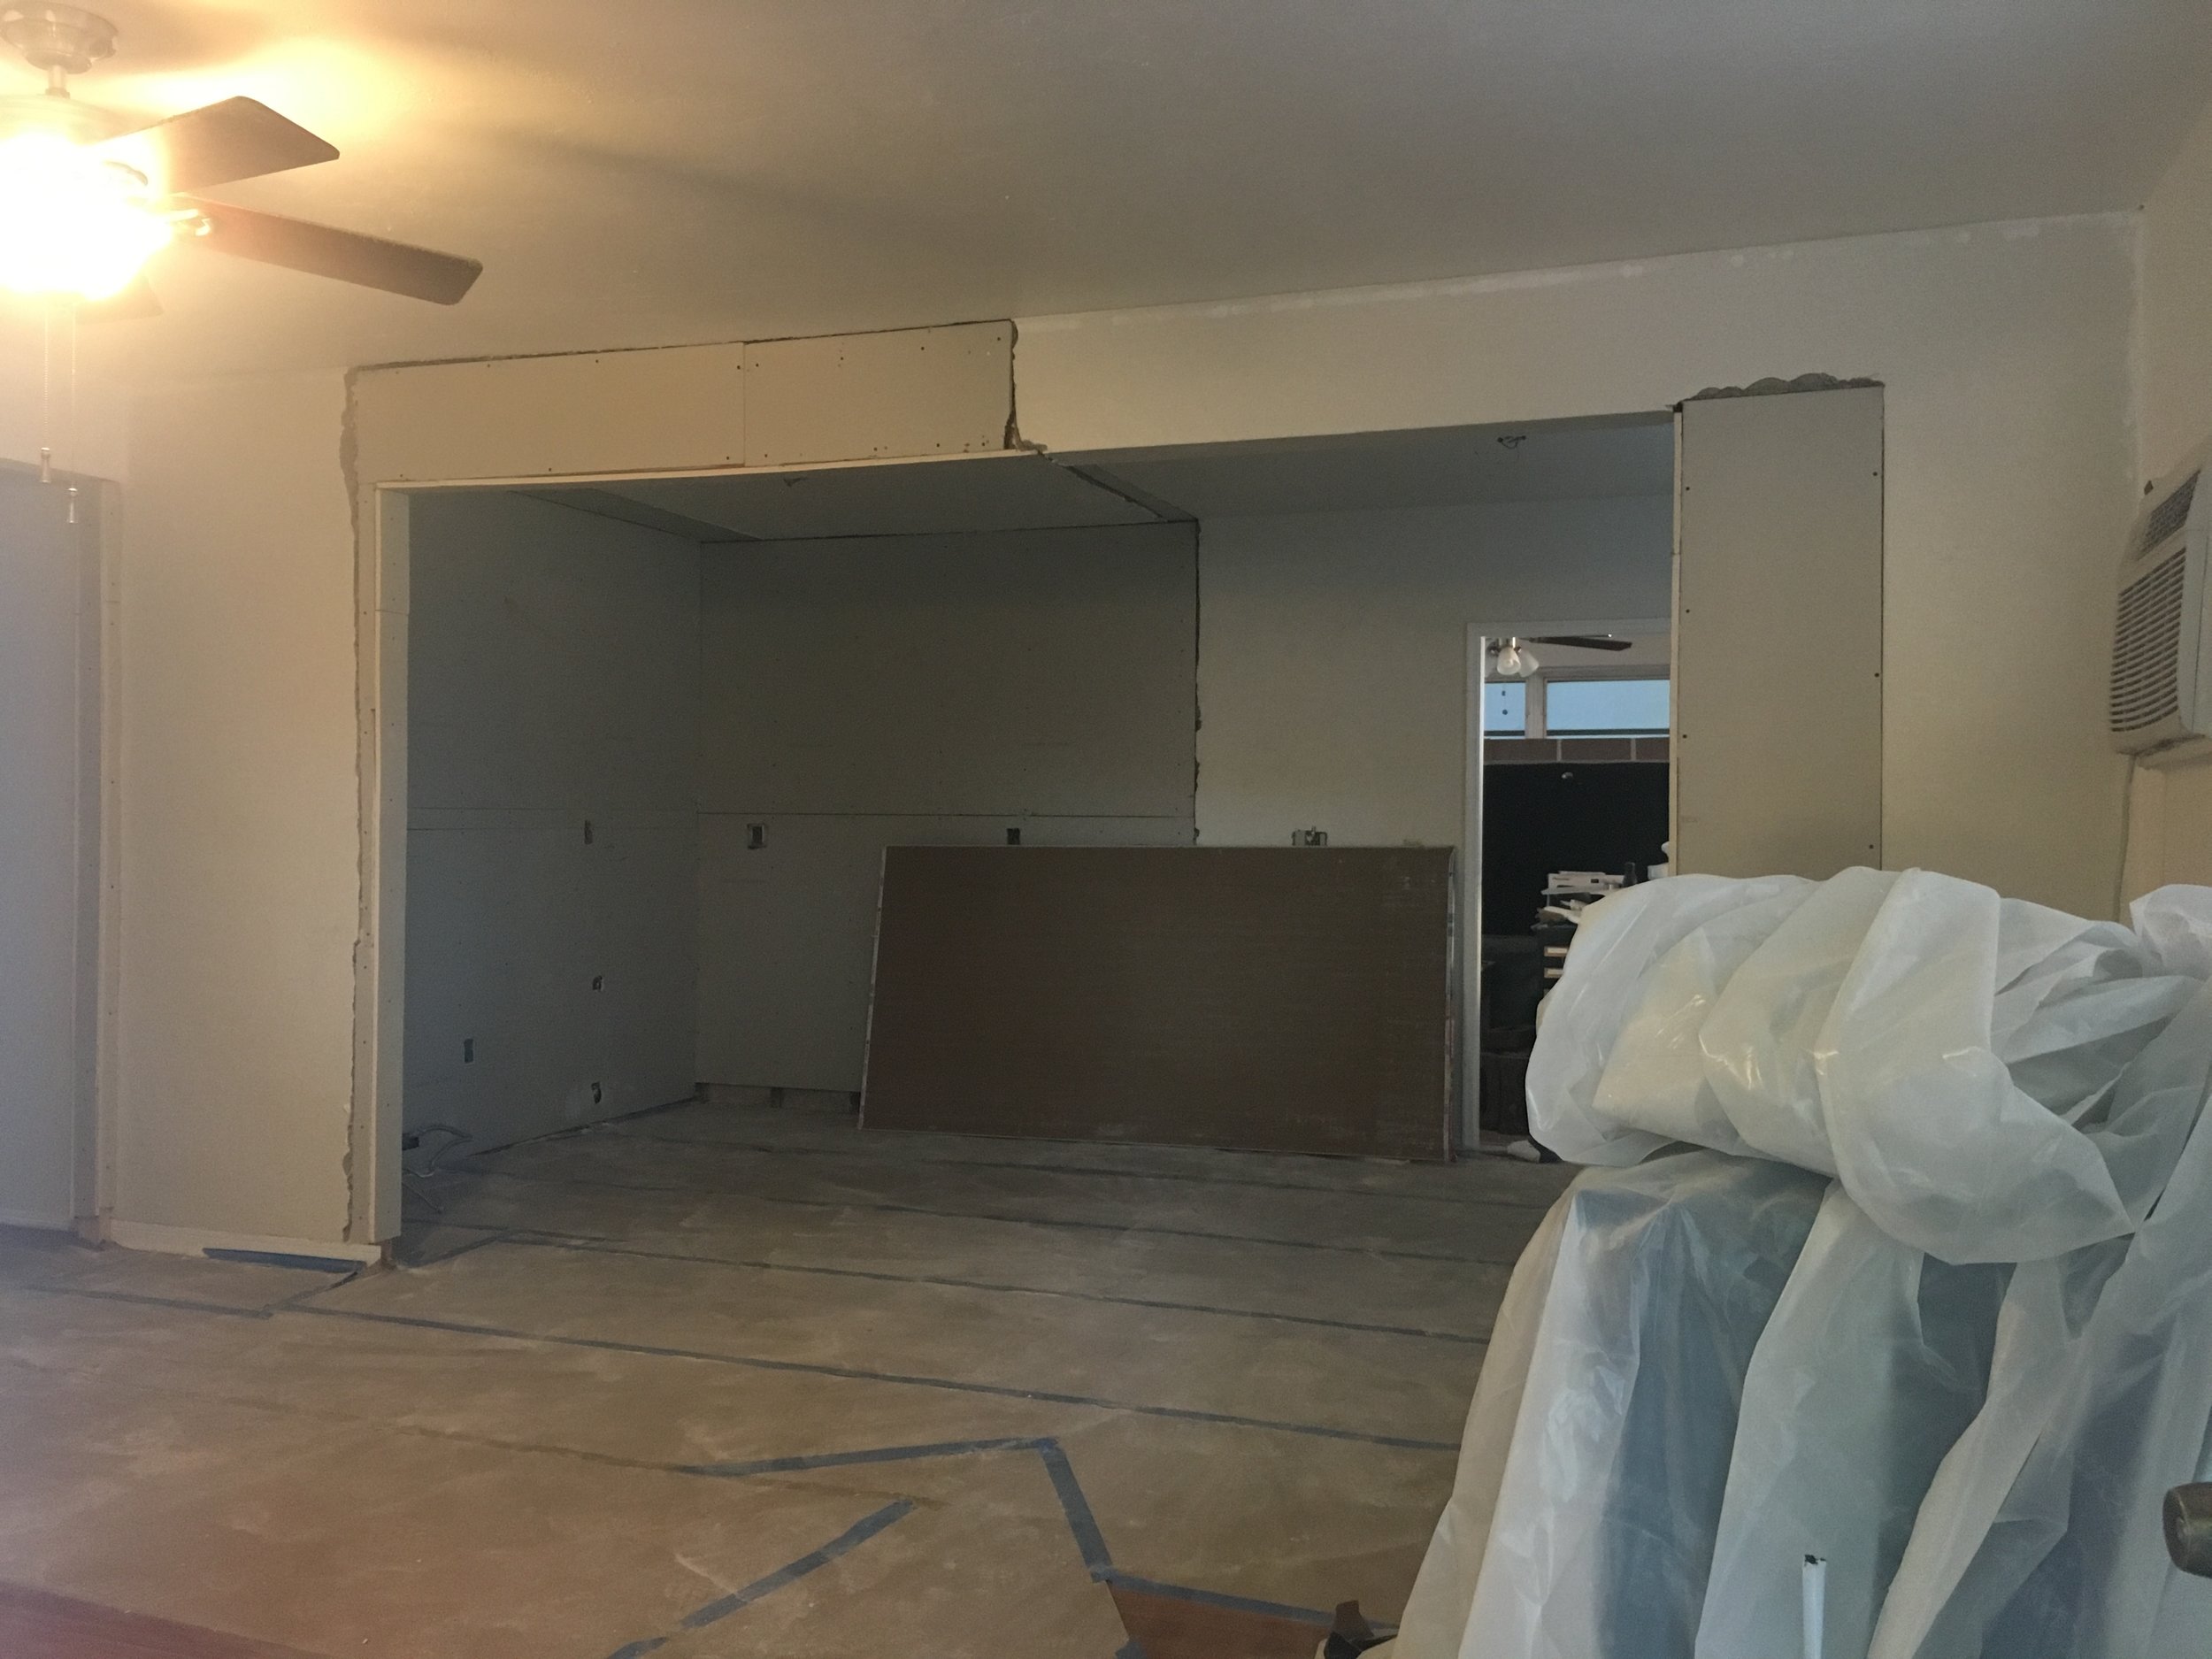  Once the new floors were installed, and electrical was completed, the drywall installers came in and patched up the walls. We removed the door to the left of the back wall as well as the small window to give us more wall and counter space. Since bot